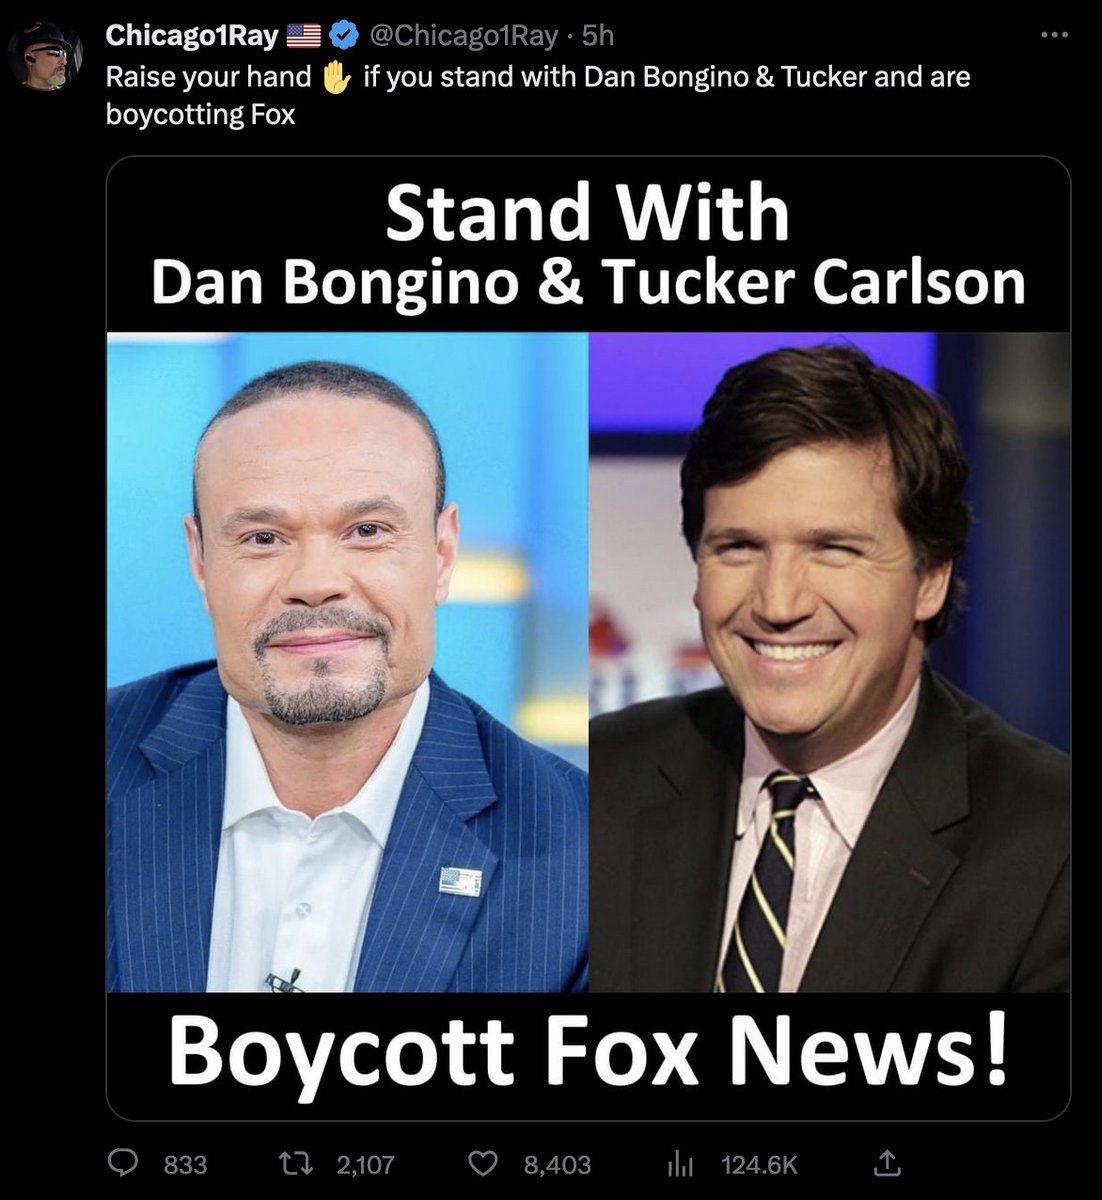 Do what you must do and boycott #FauxNews.